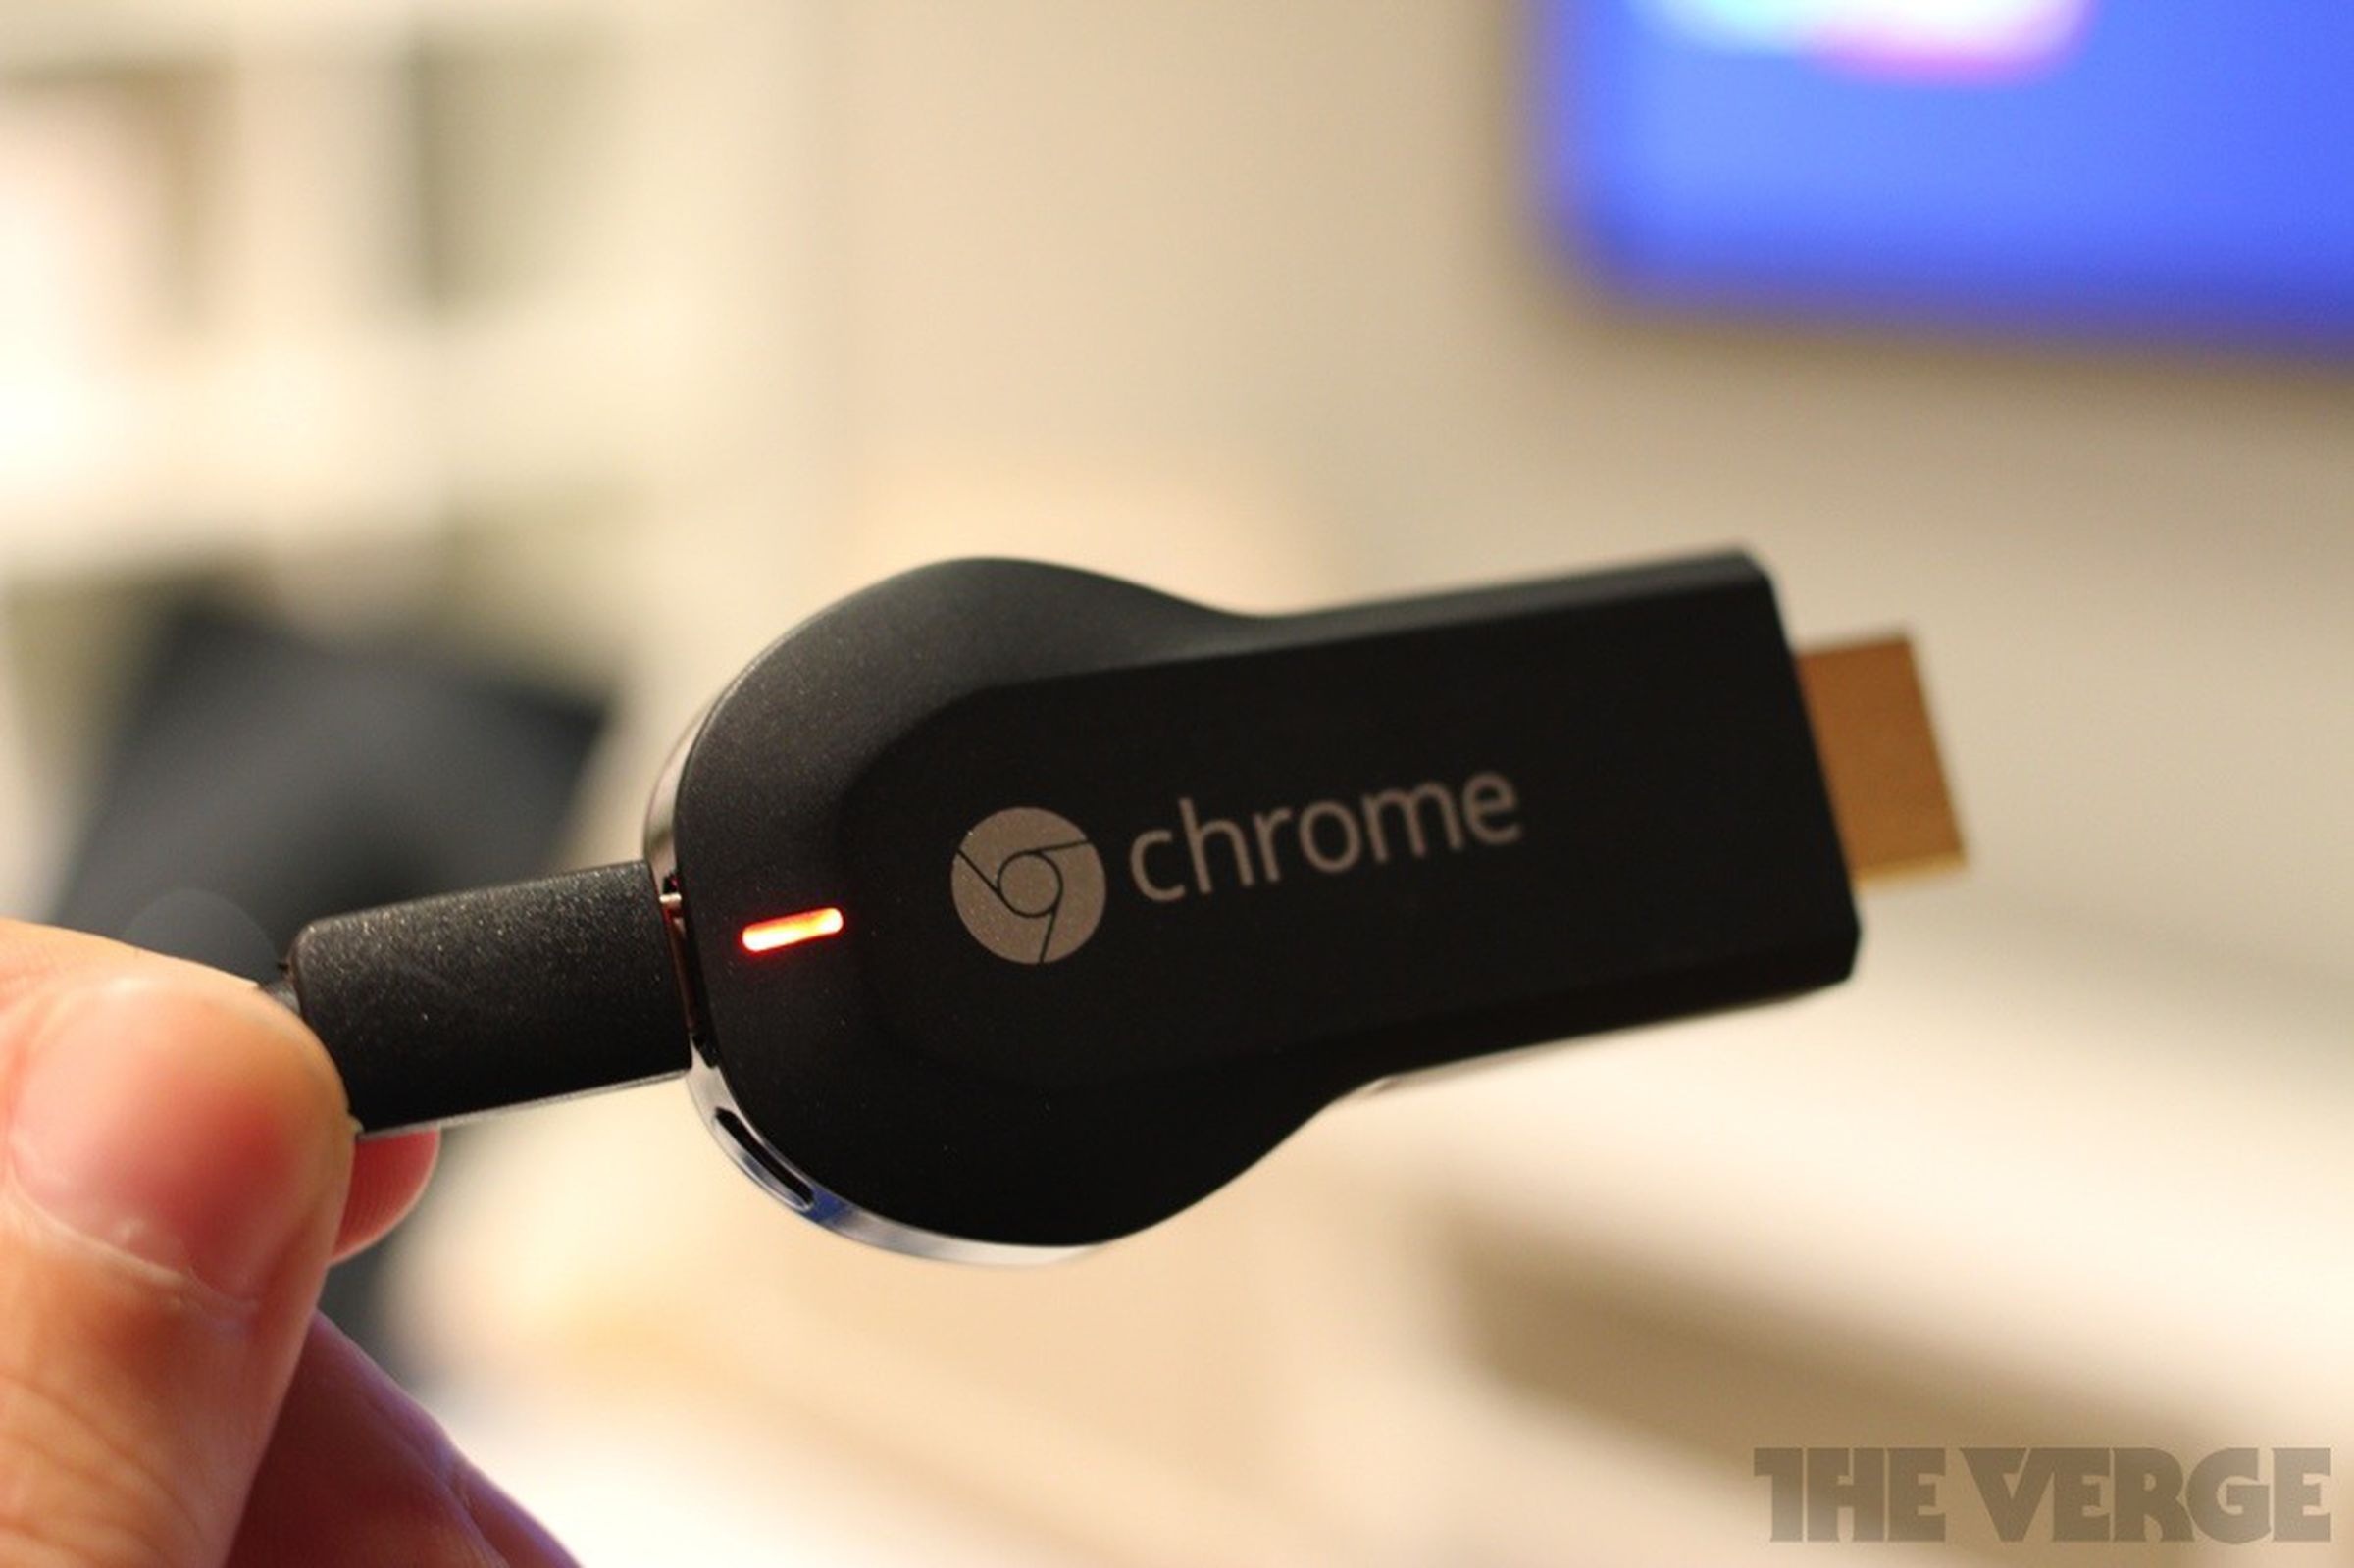 Chromecast hands-on pictures